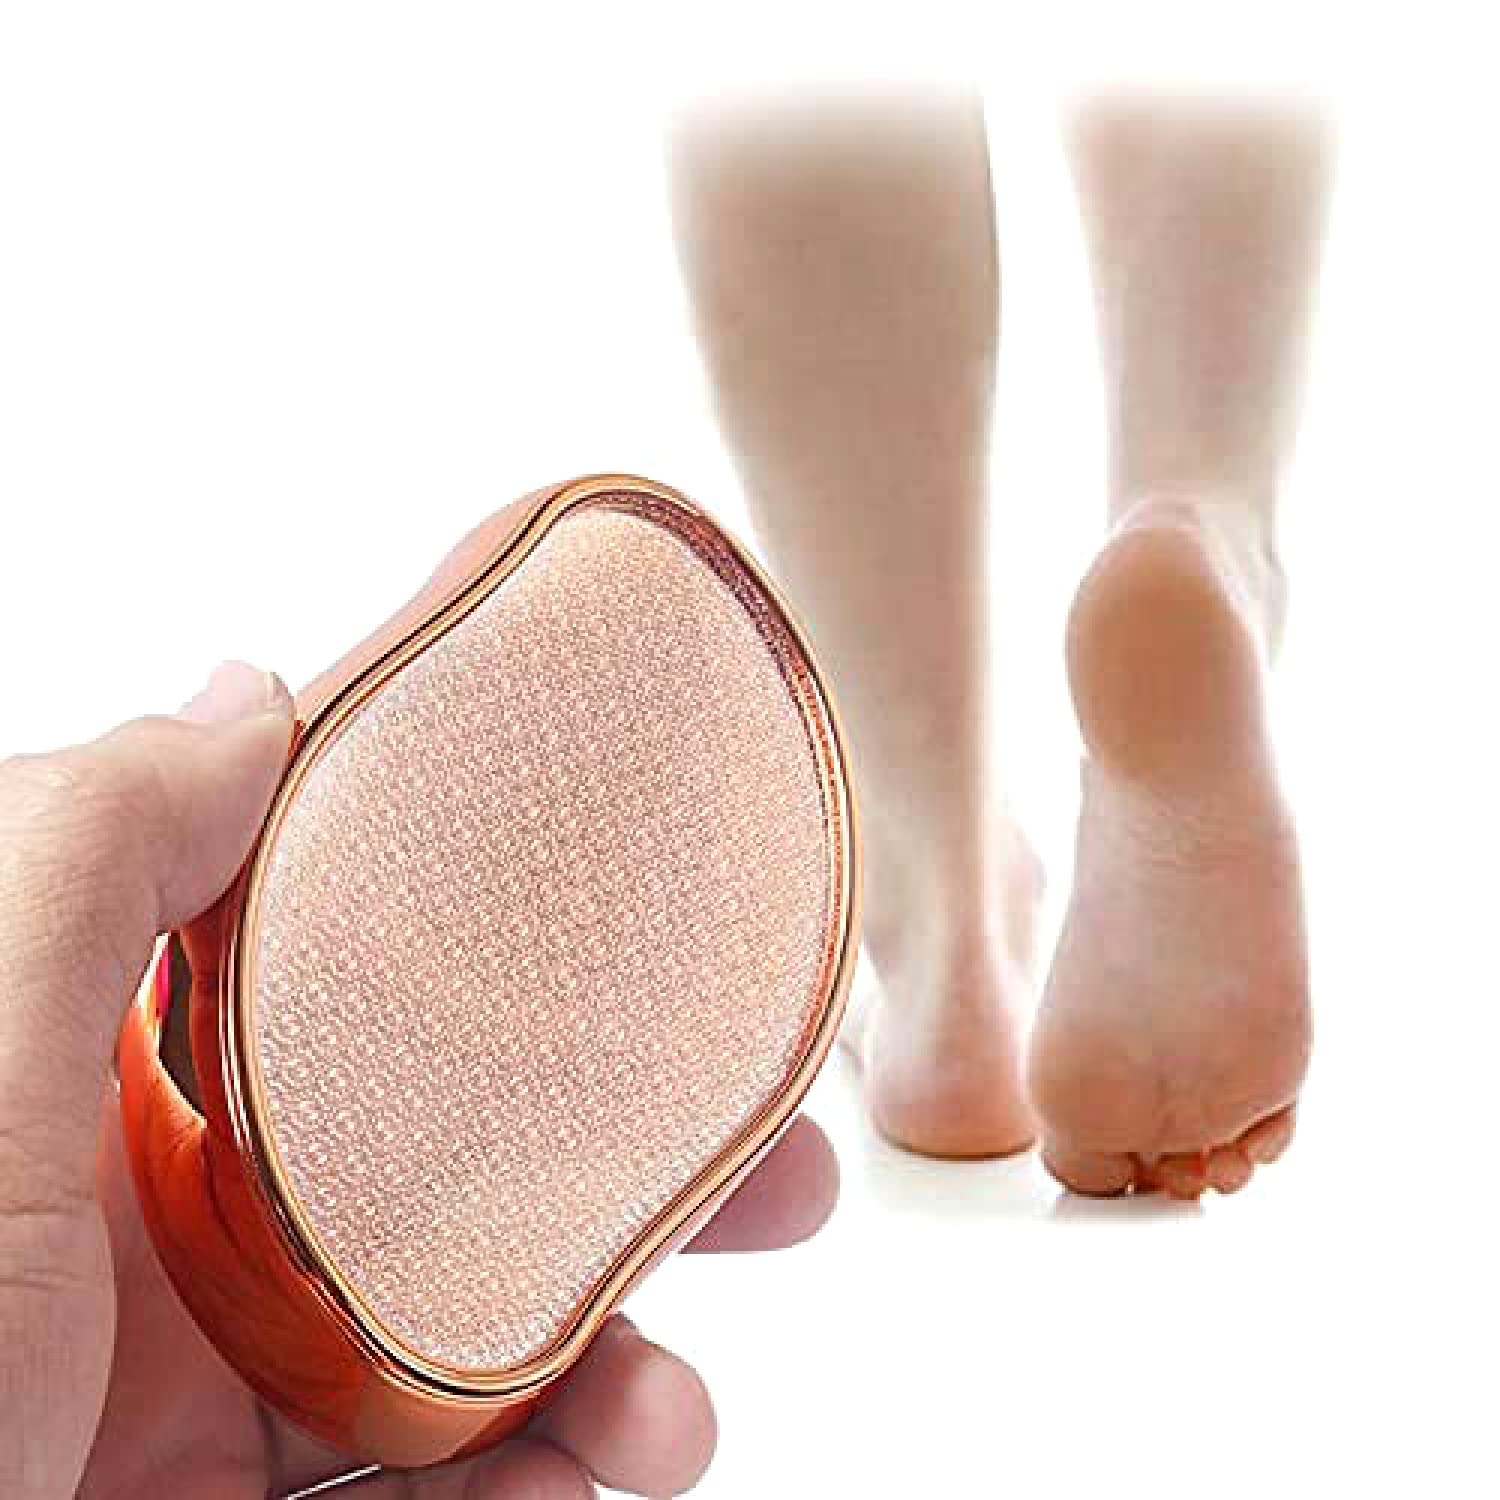  VANWIN Glass Foot File, Callus Remover for Feet Foot Scrubber  Dead Skin Remover with Nano Micro-Abrasive Particles, Foot Rasp Heel Scraper  Hard Skin Remover Foot Care Pedicure Tool on Wet